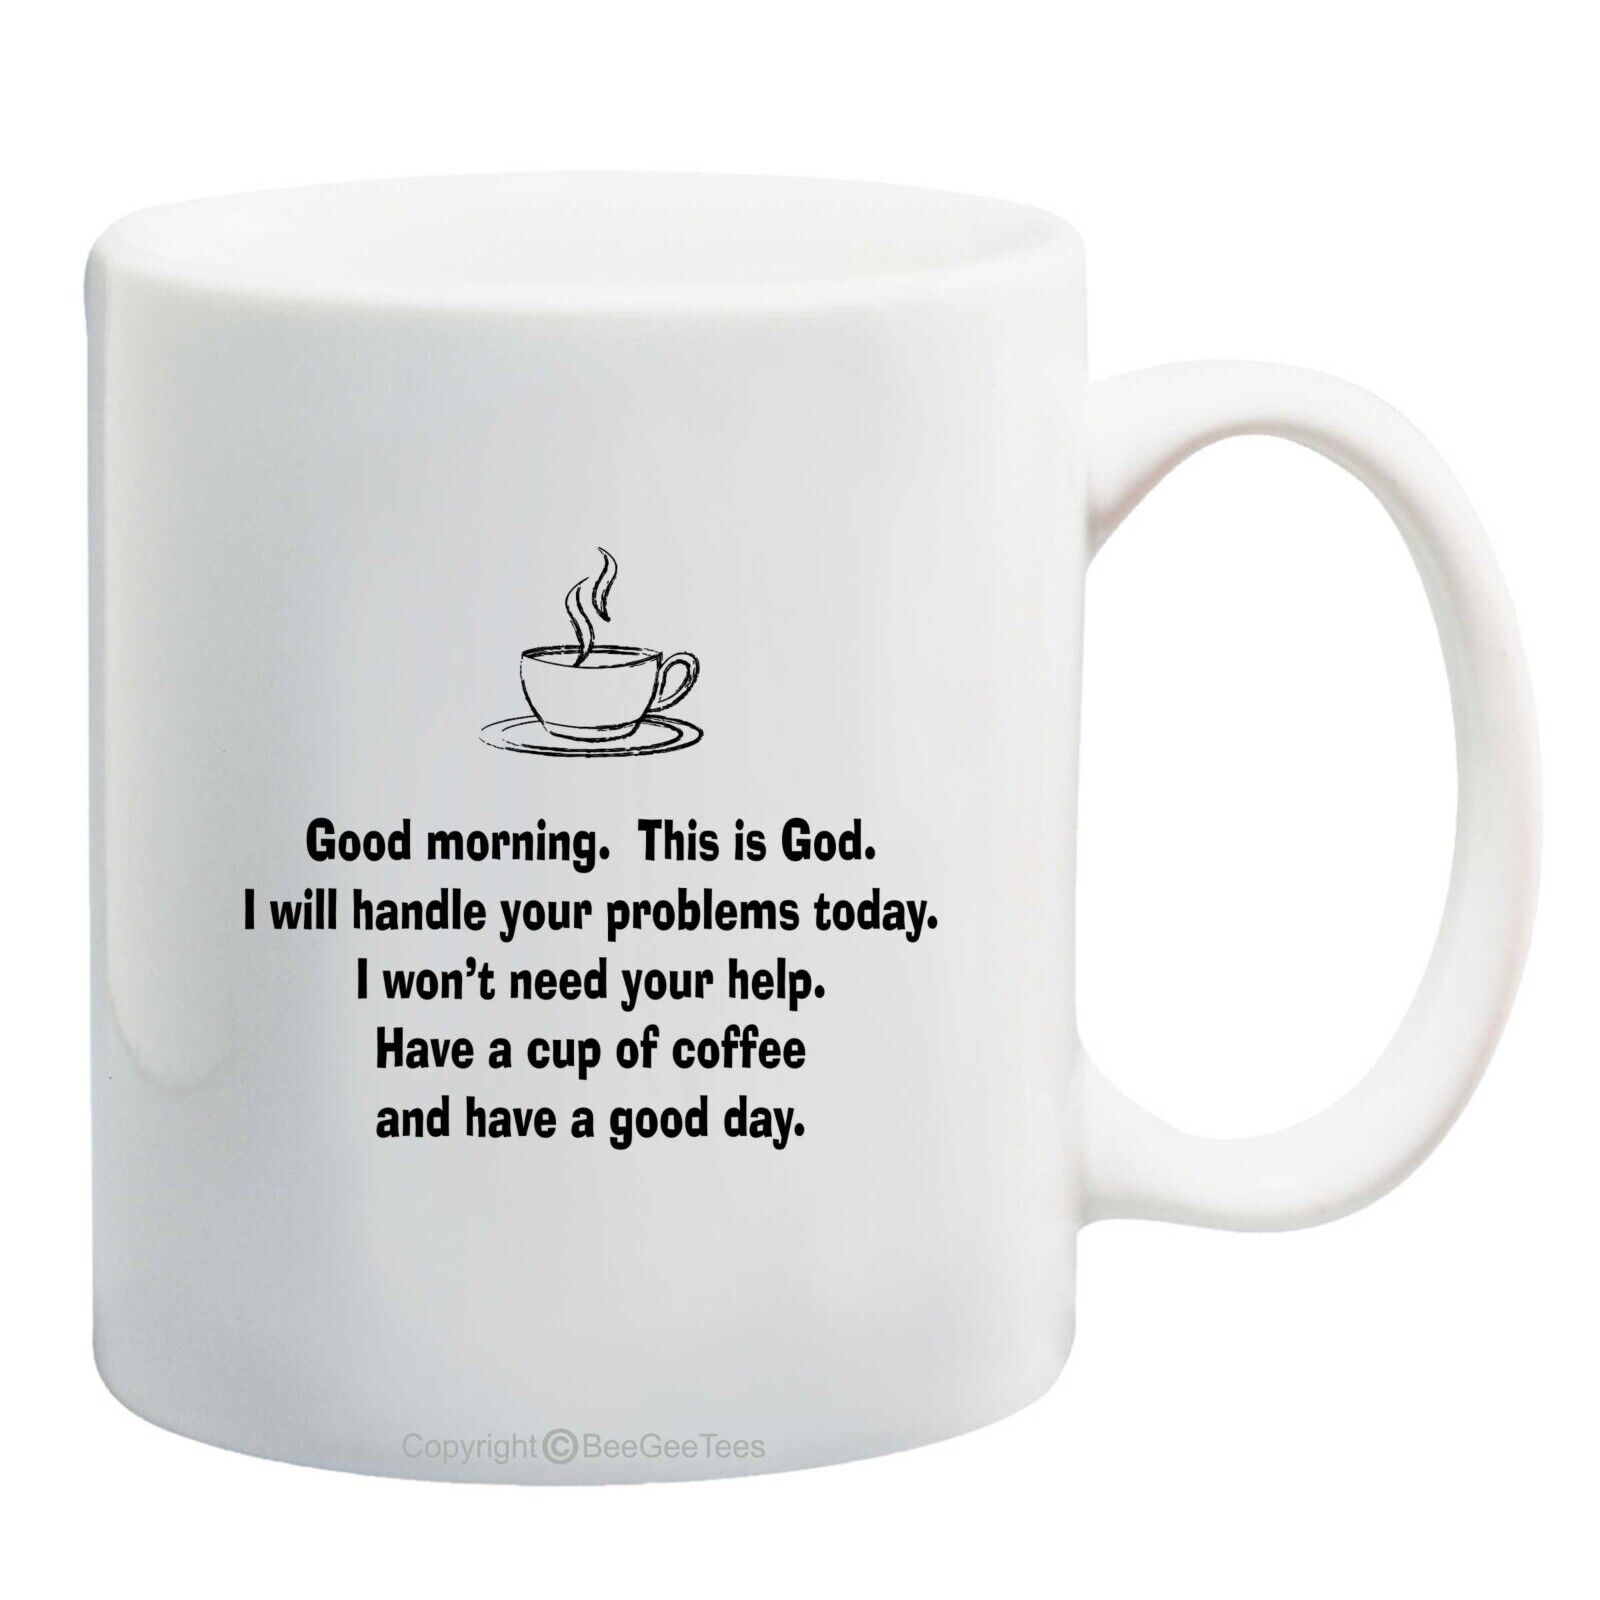 Good Morning This Is God I Will Handle Your Problems Mug (11 oz) by BeeGeeTees